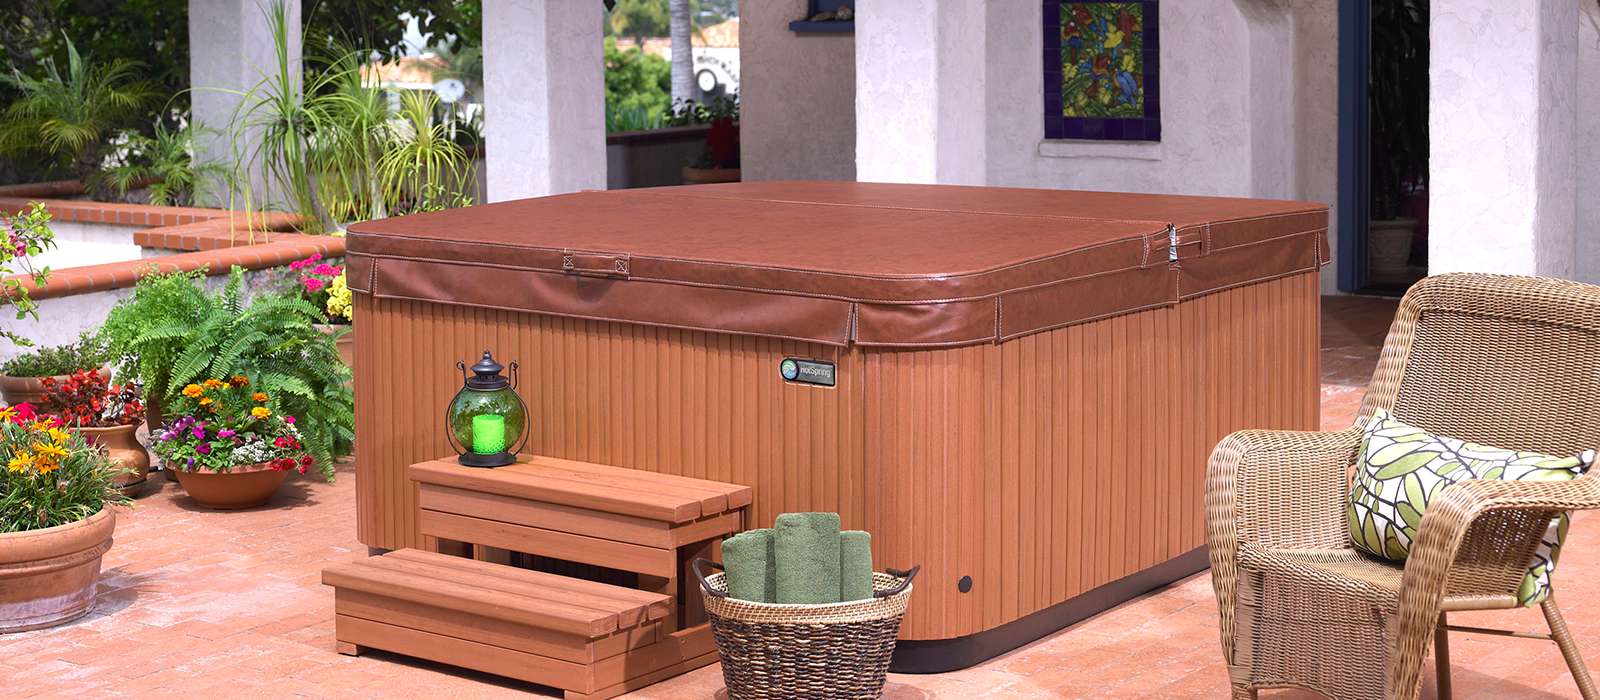 Featuring sculpted shells and Everwood® cabinets in a variety of colors, the Glow spa from Hot Spring Spas is a beautiful addition to any backyard.